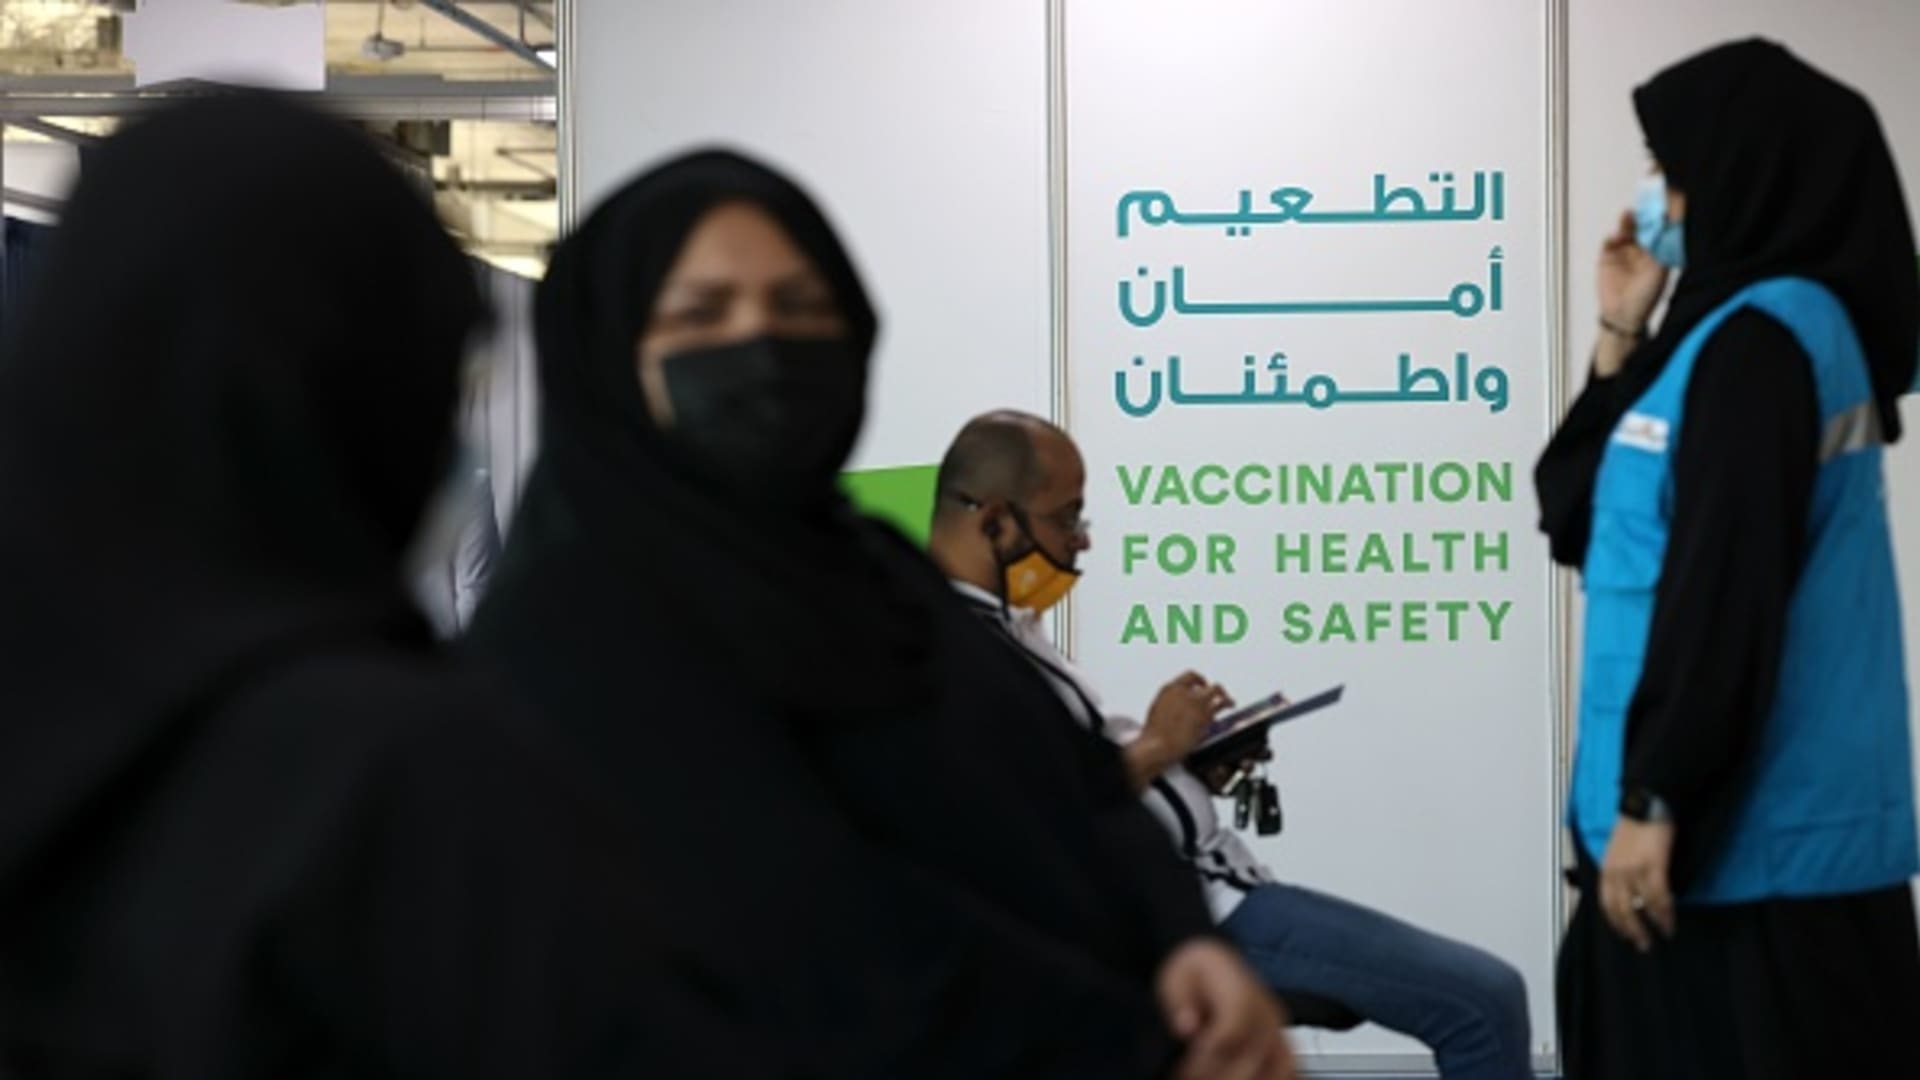 People wait their turn to get vaccinated against the coronavirus at a vaccination center set up at the Dubai International Financial Center in the Gulf emirate of Dubai, on February 3, 2021. The UAE has administered at least three million doses to more than a quarter of its population.